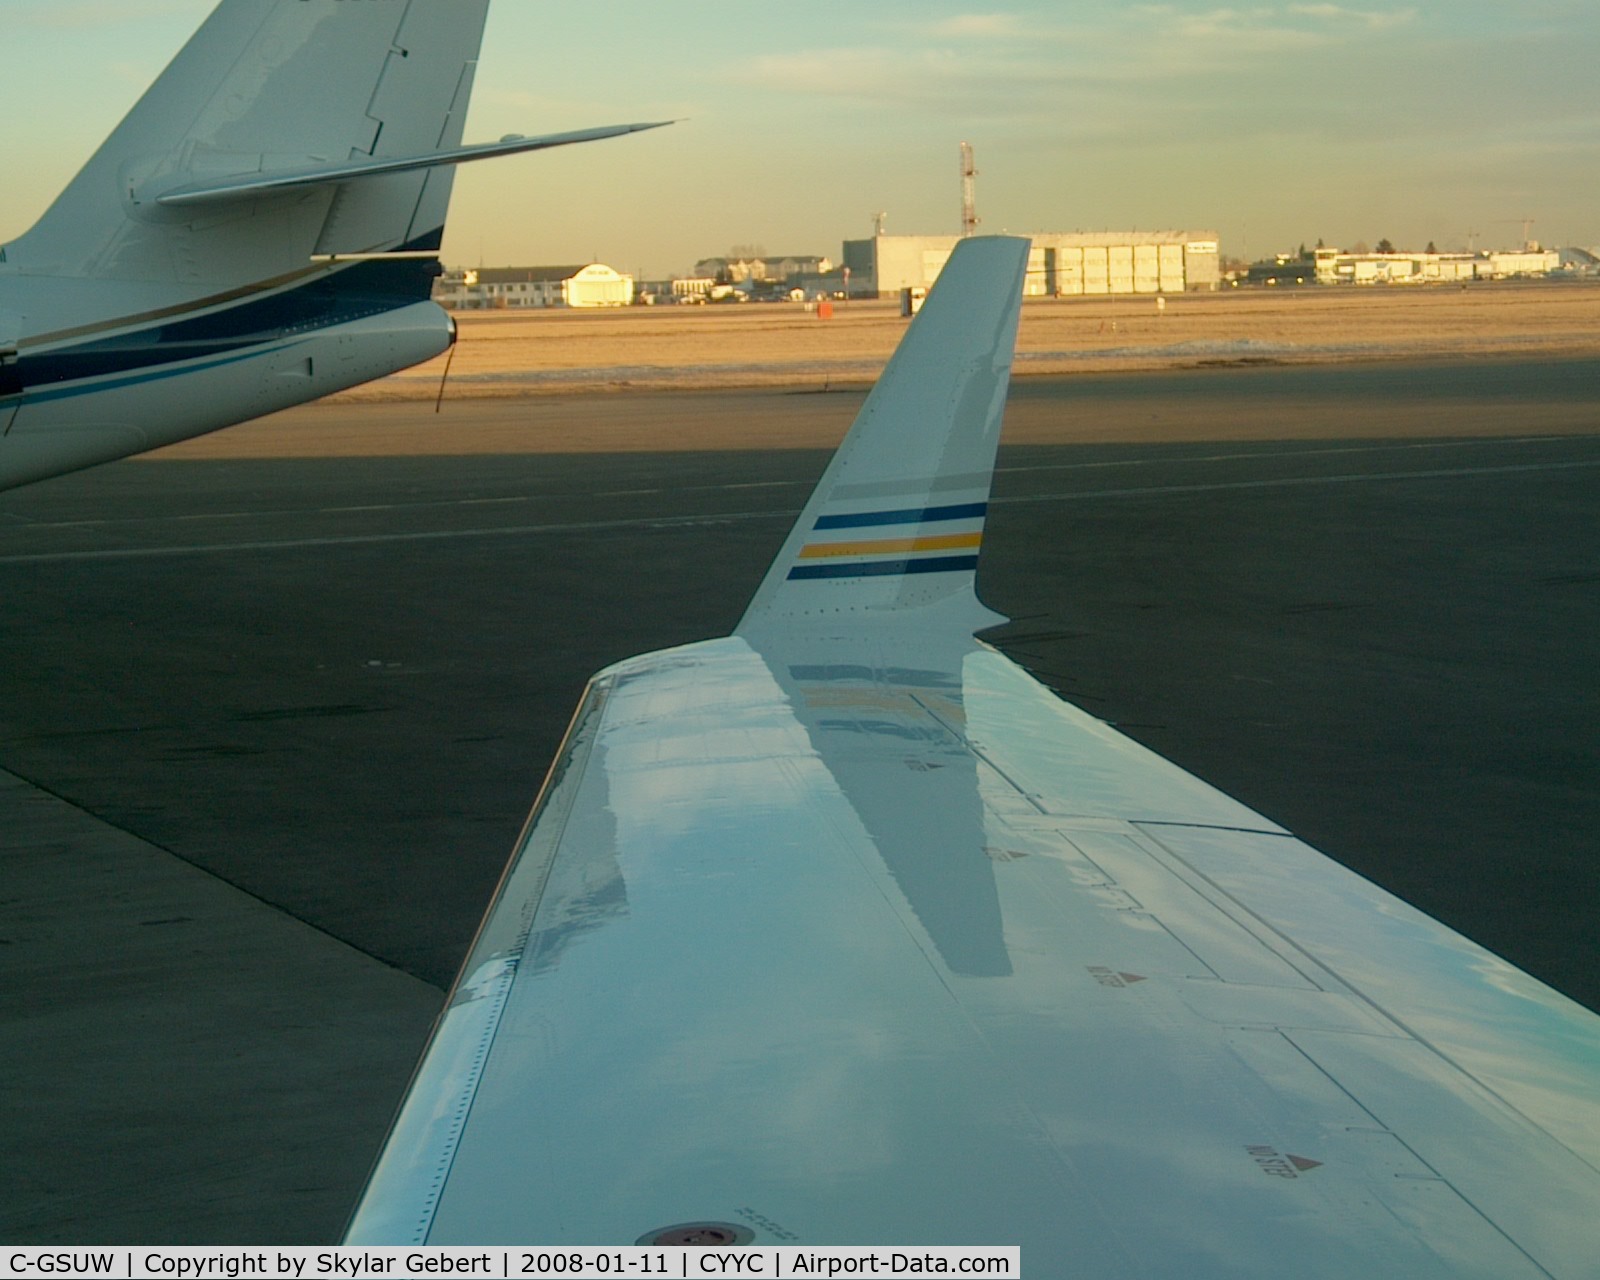 C-GSUW, 2005 Canadair CRJ-200LR (CL-600-2B19) C/N 8047, looking out at the rightside wing